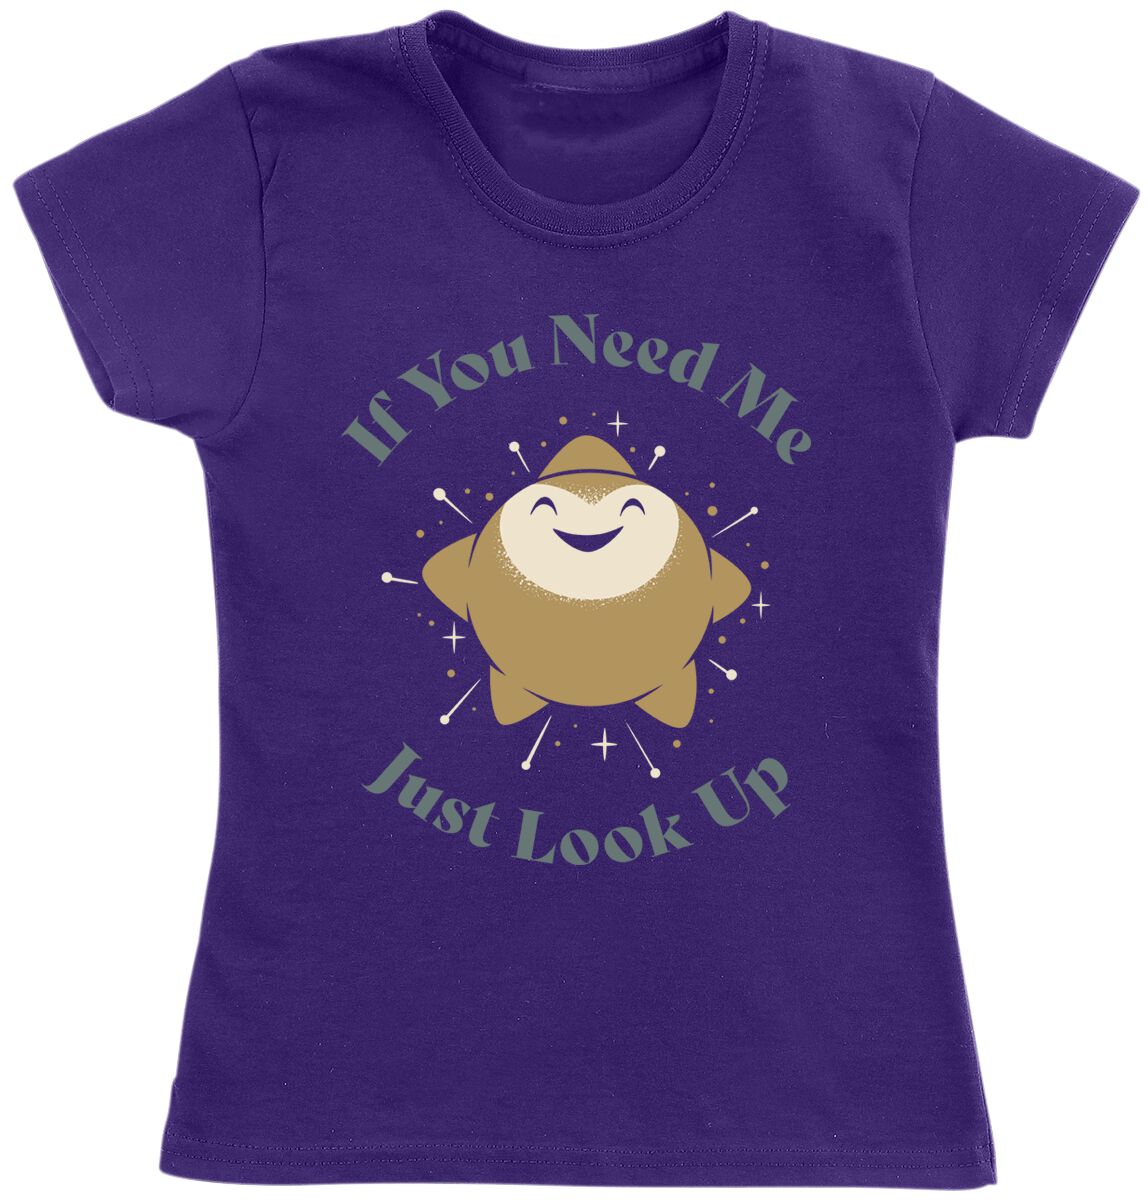 Wish If You Need Me Just Look Up T-Shirt lila in 152